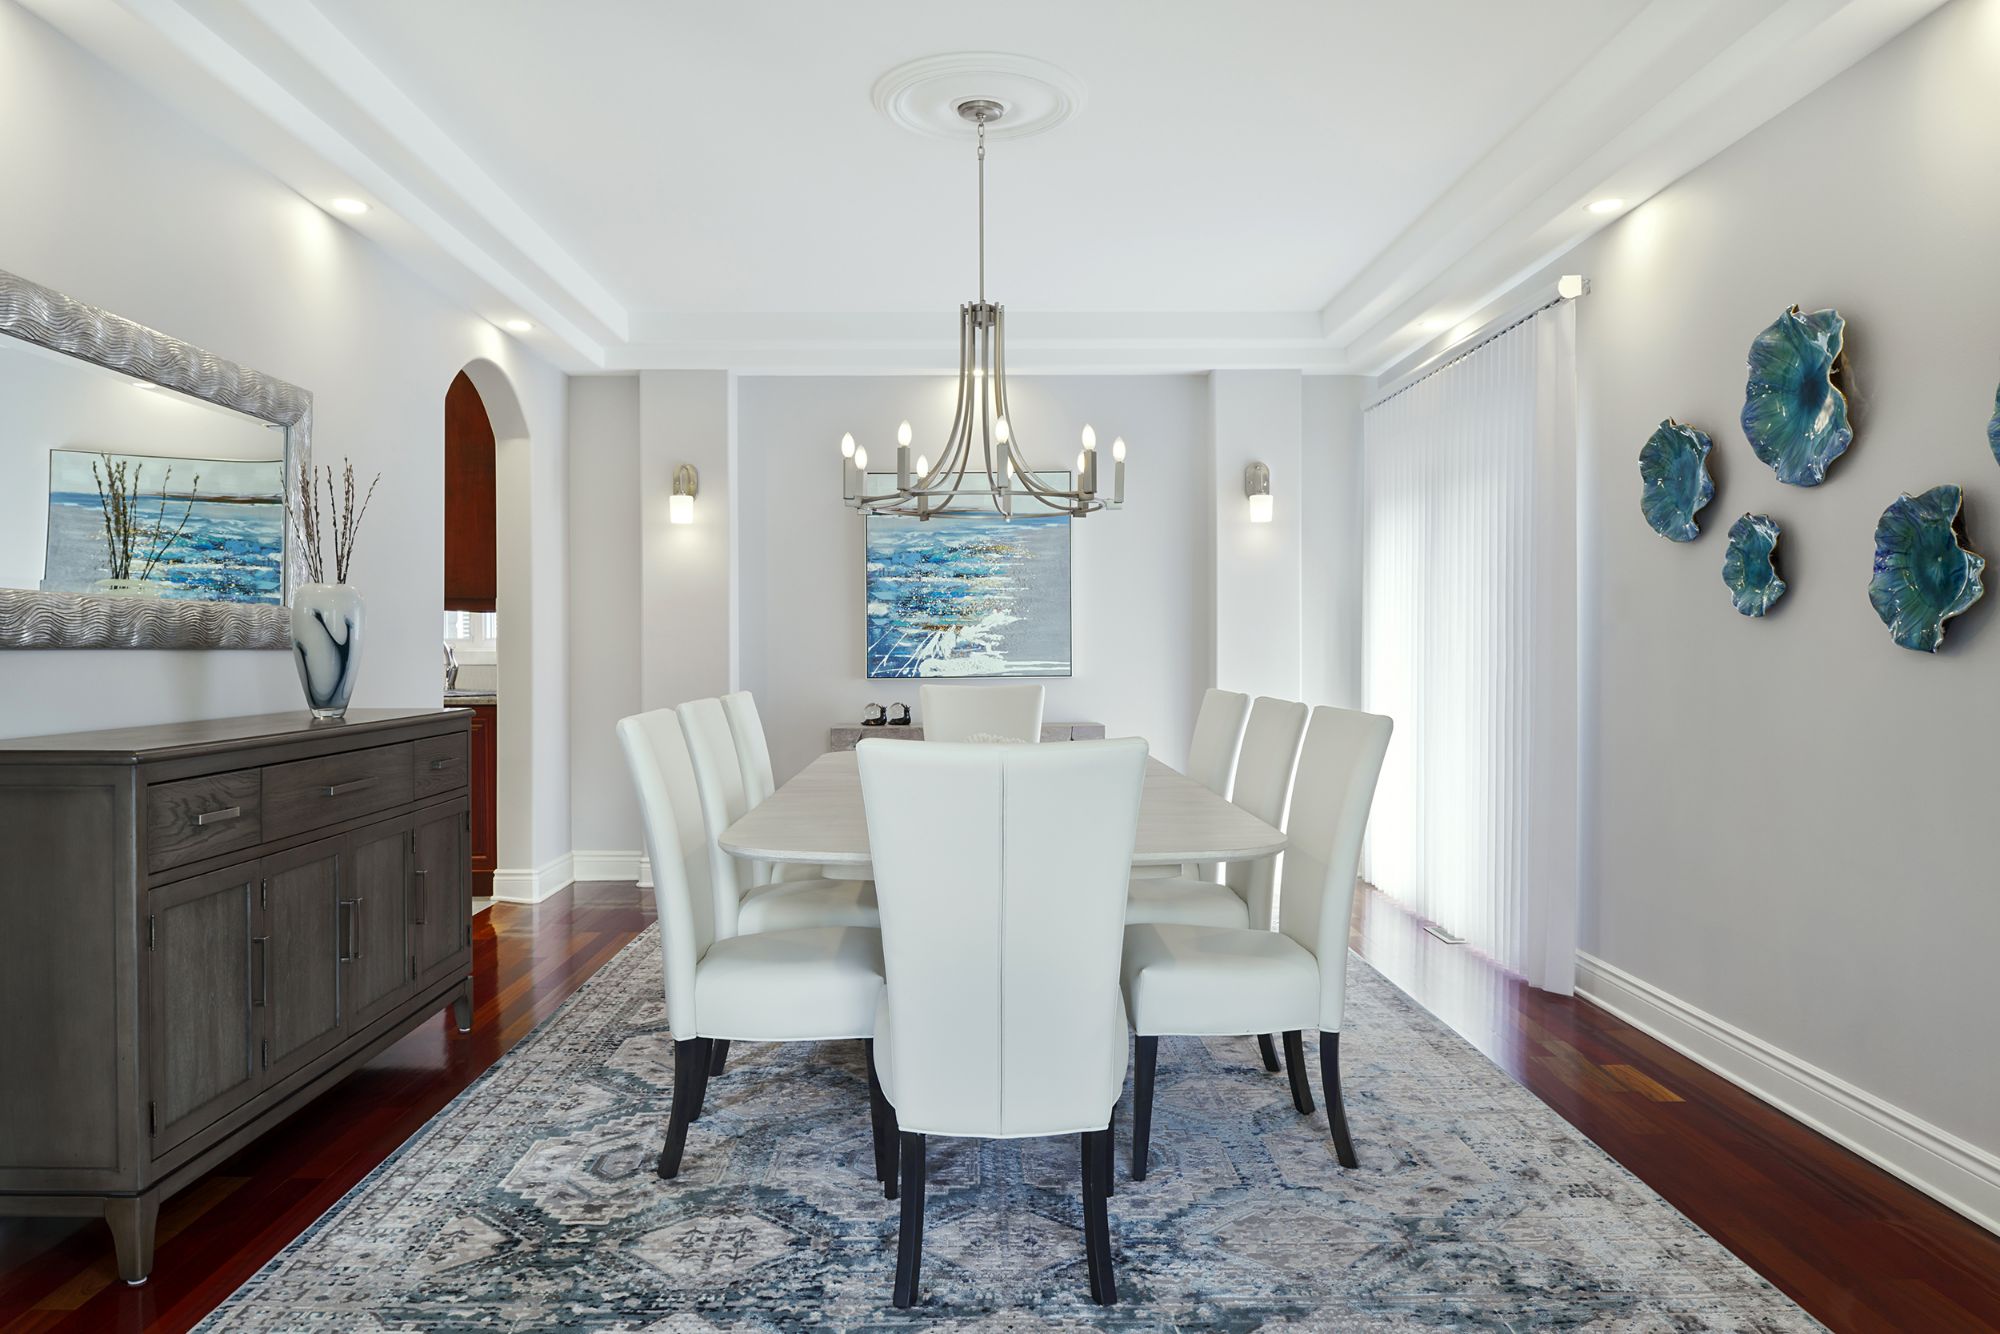 Dining room interior design with blue accents